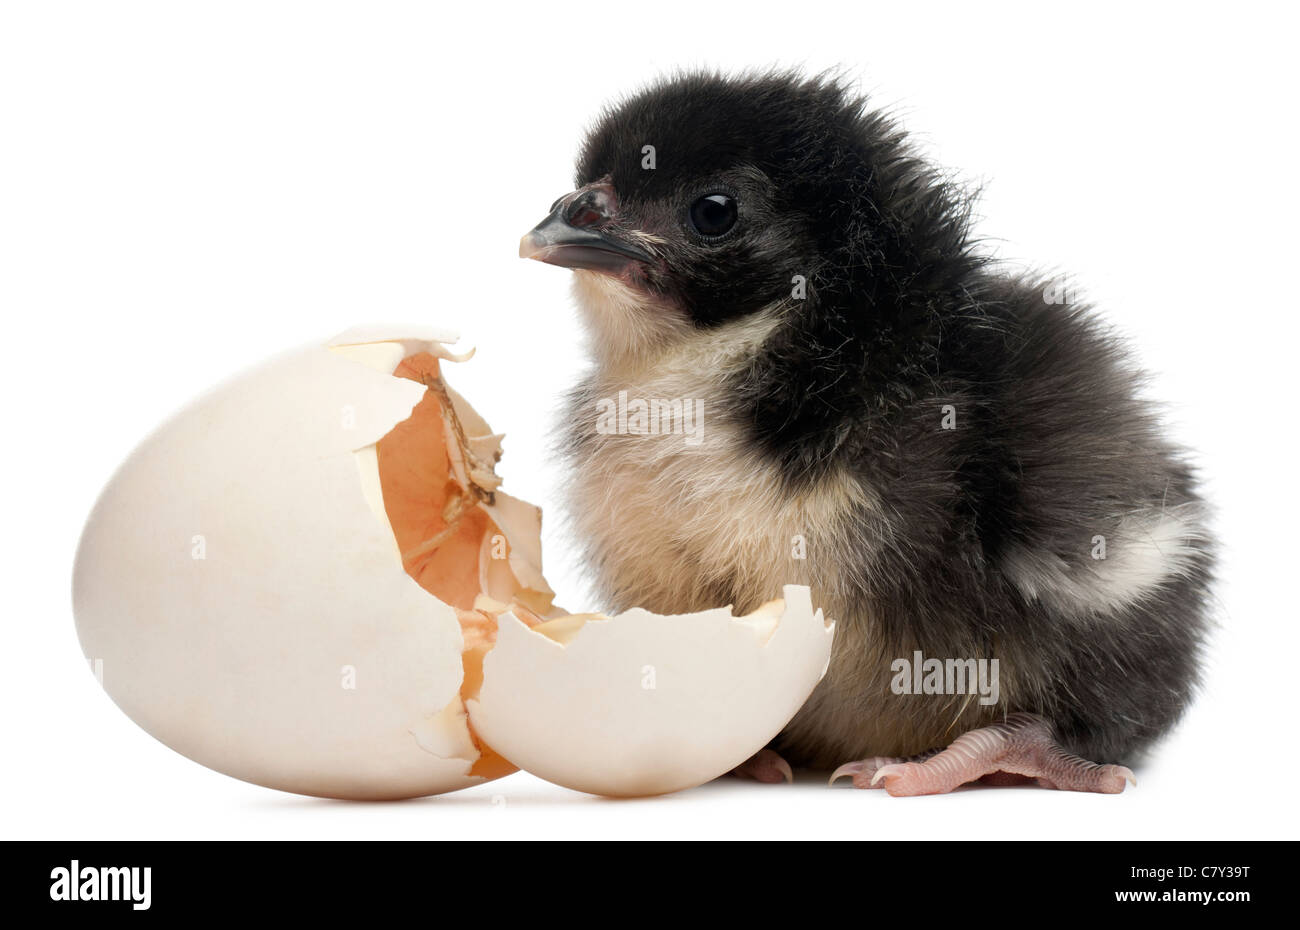 Chick, Gallus gallus domesticus, 8 hours old, standing next to its egg in front of white background Stock Photo